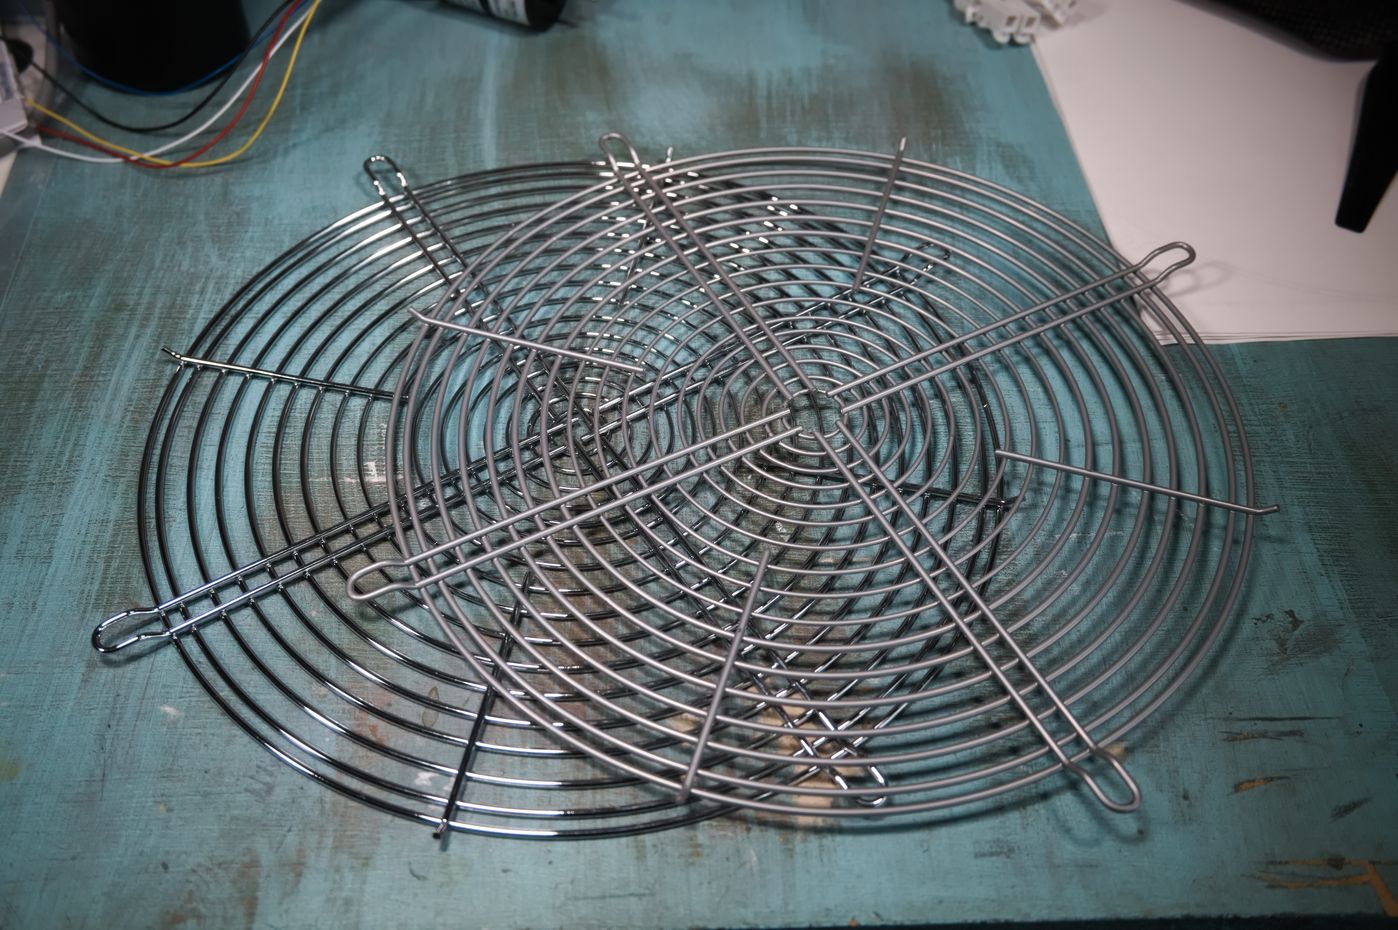 Two grilles. They consist of concentric rings of metal wire held together by four radial metal wires.